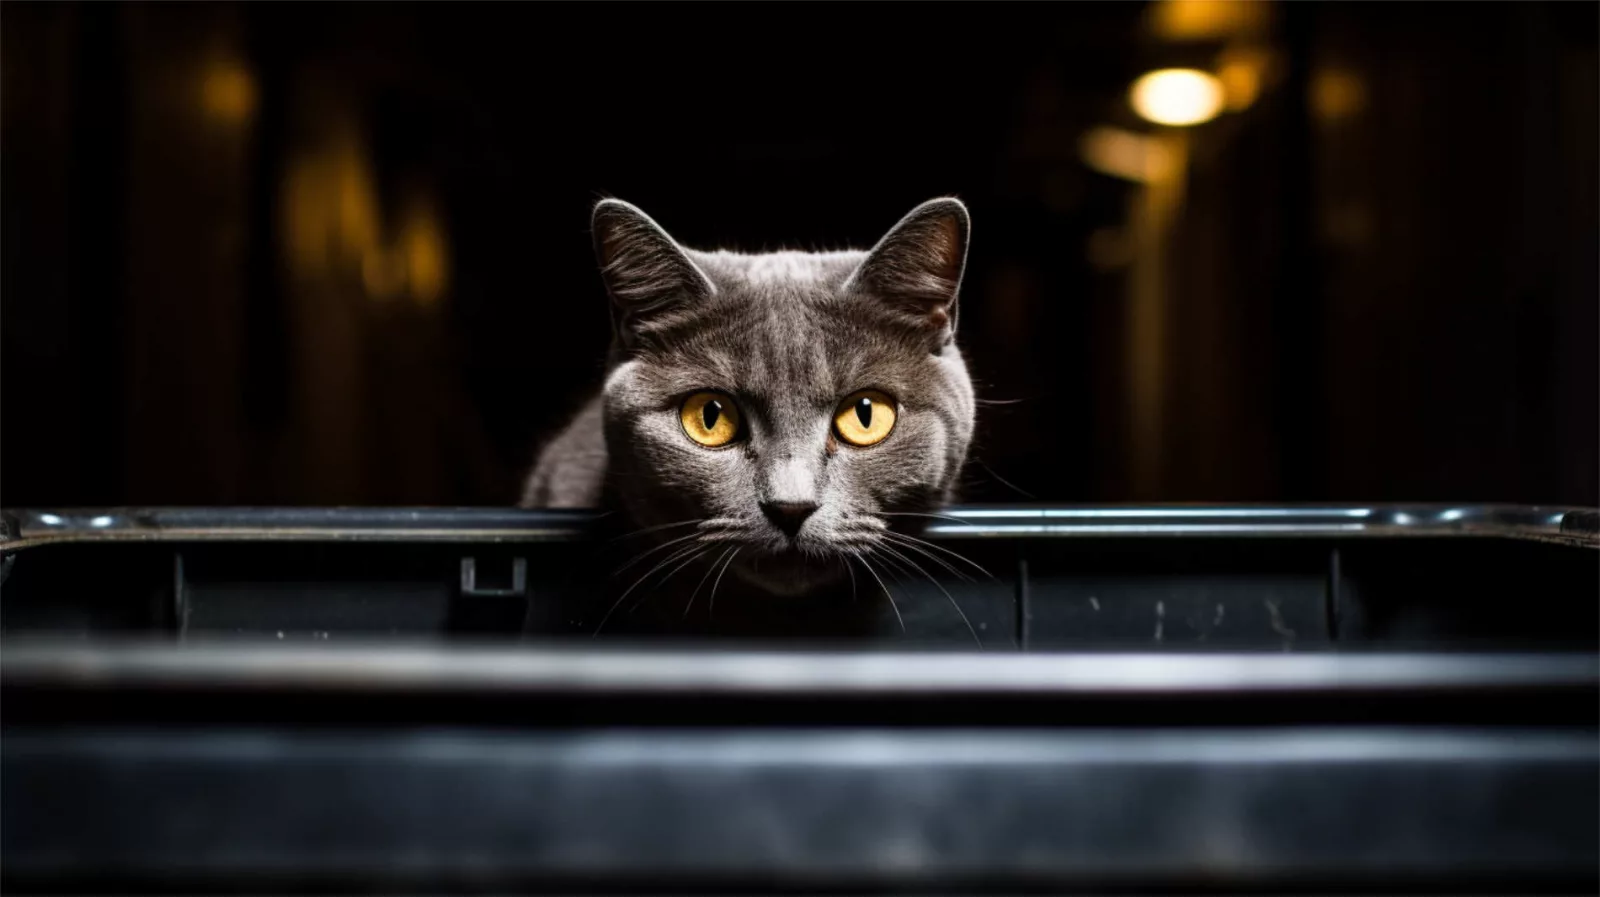 British shorthair cat checking out a dumpster